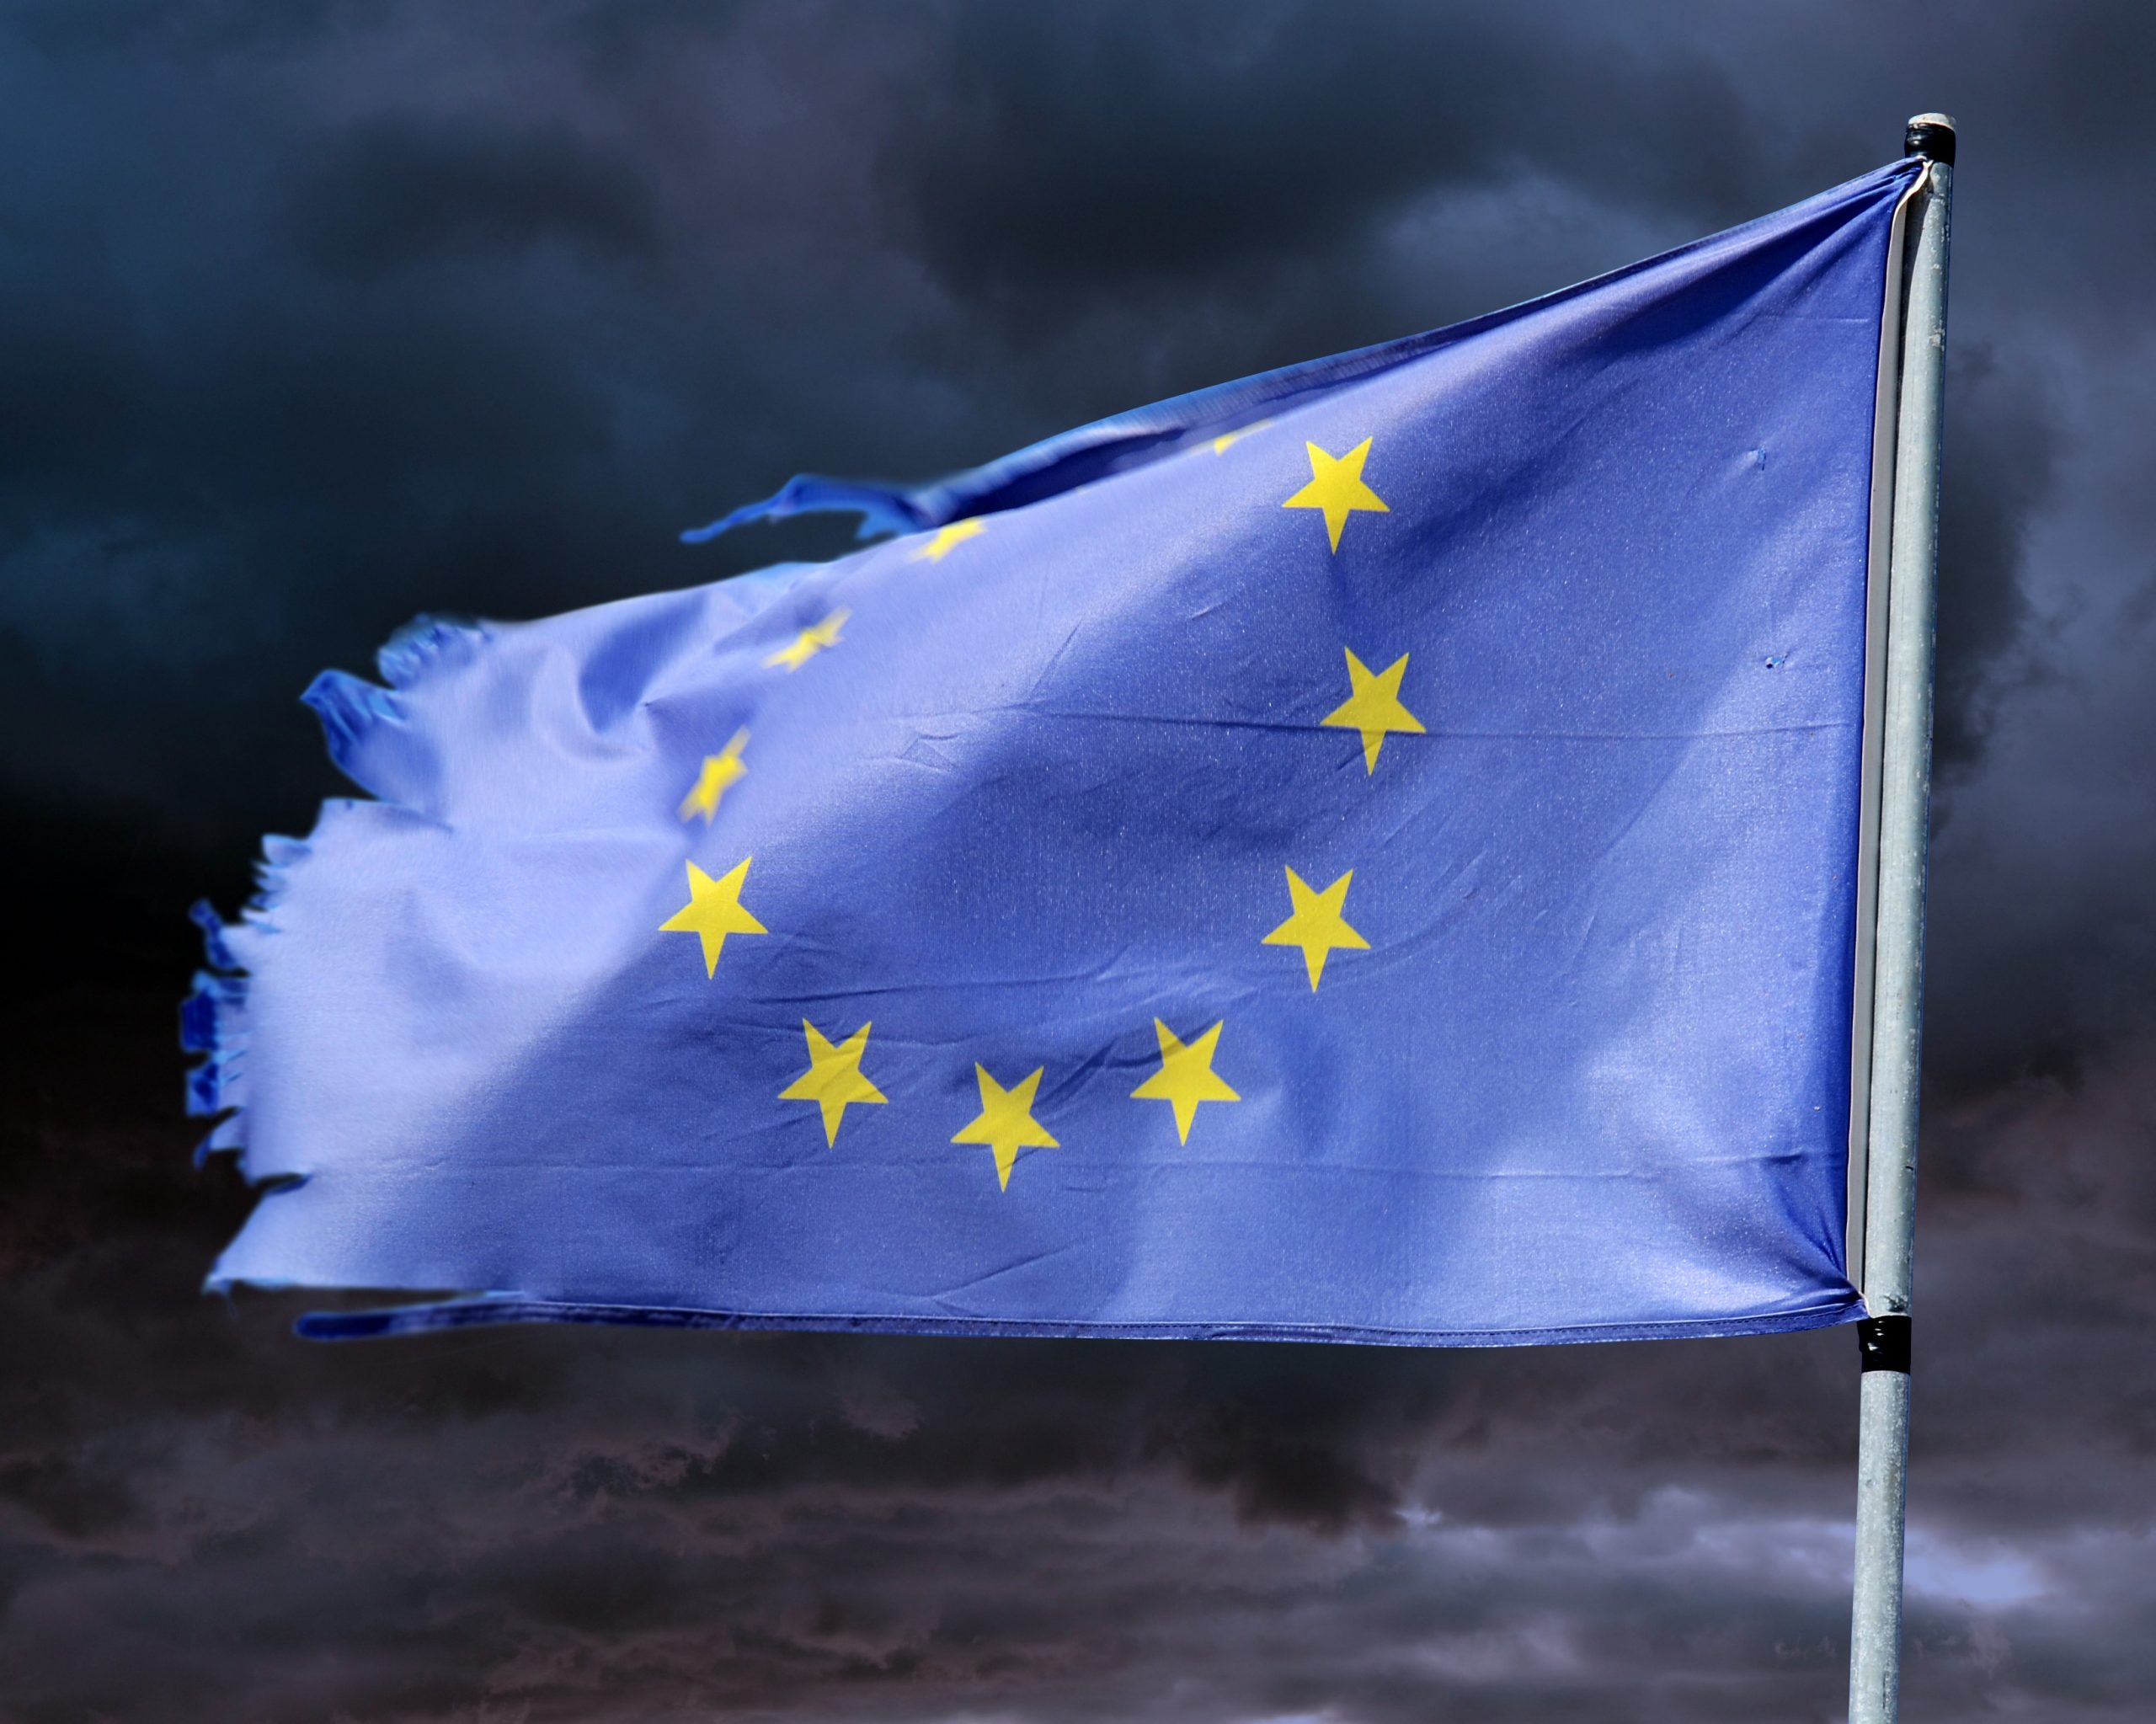 ELIAMEP Outlook – Predictions for 2024: Europe Has Seen Better Days